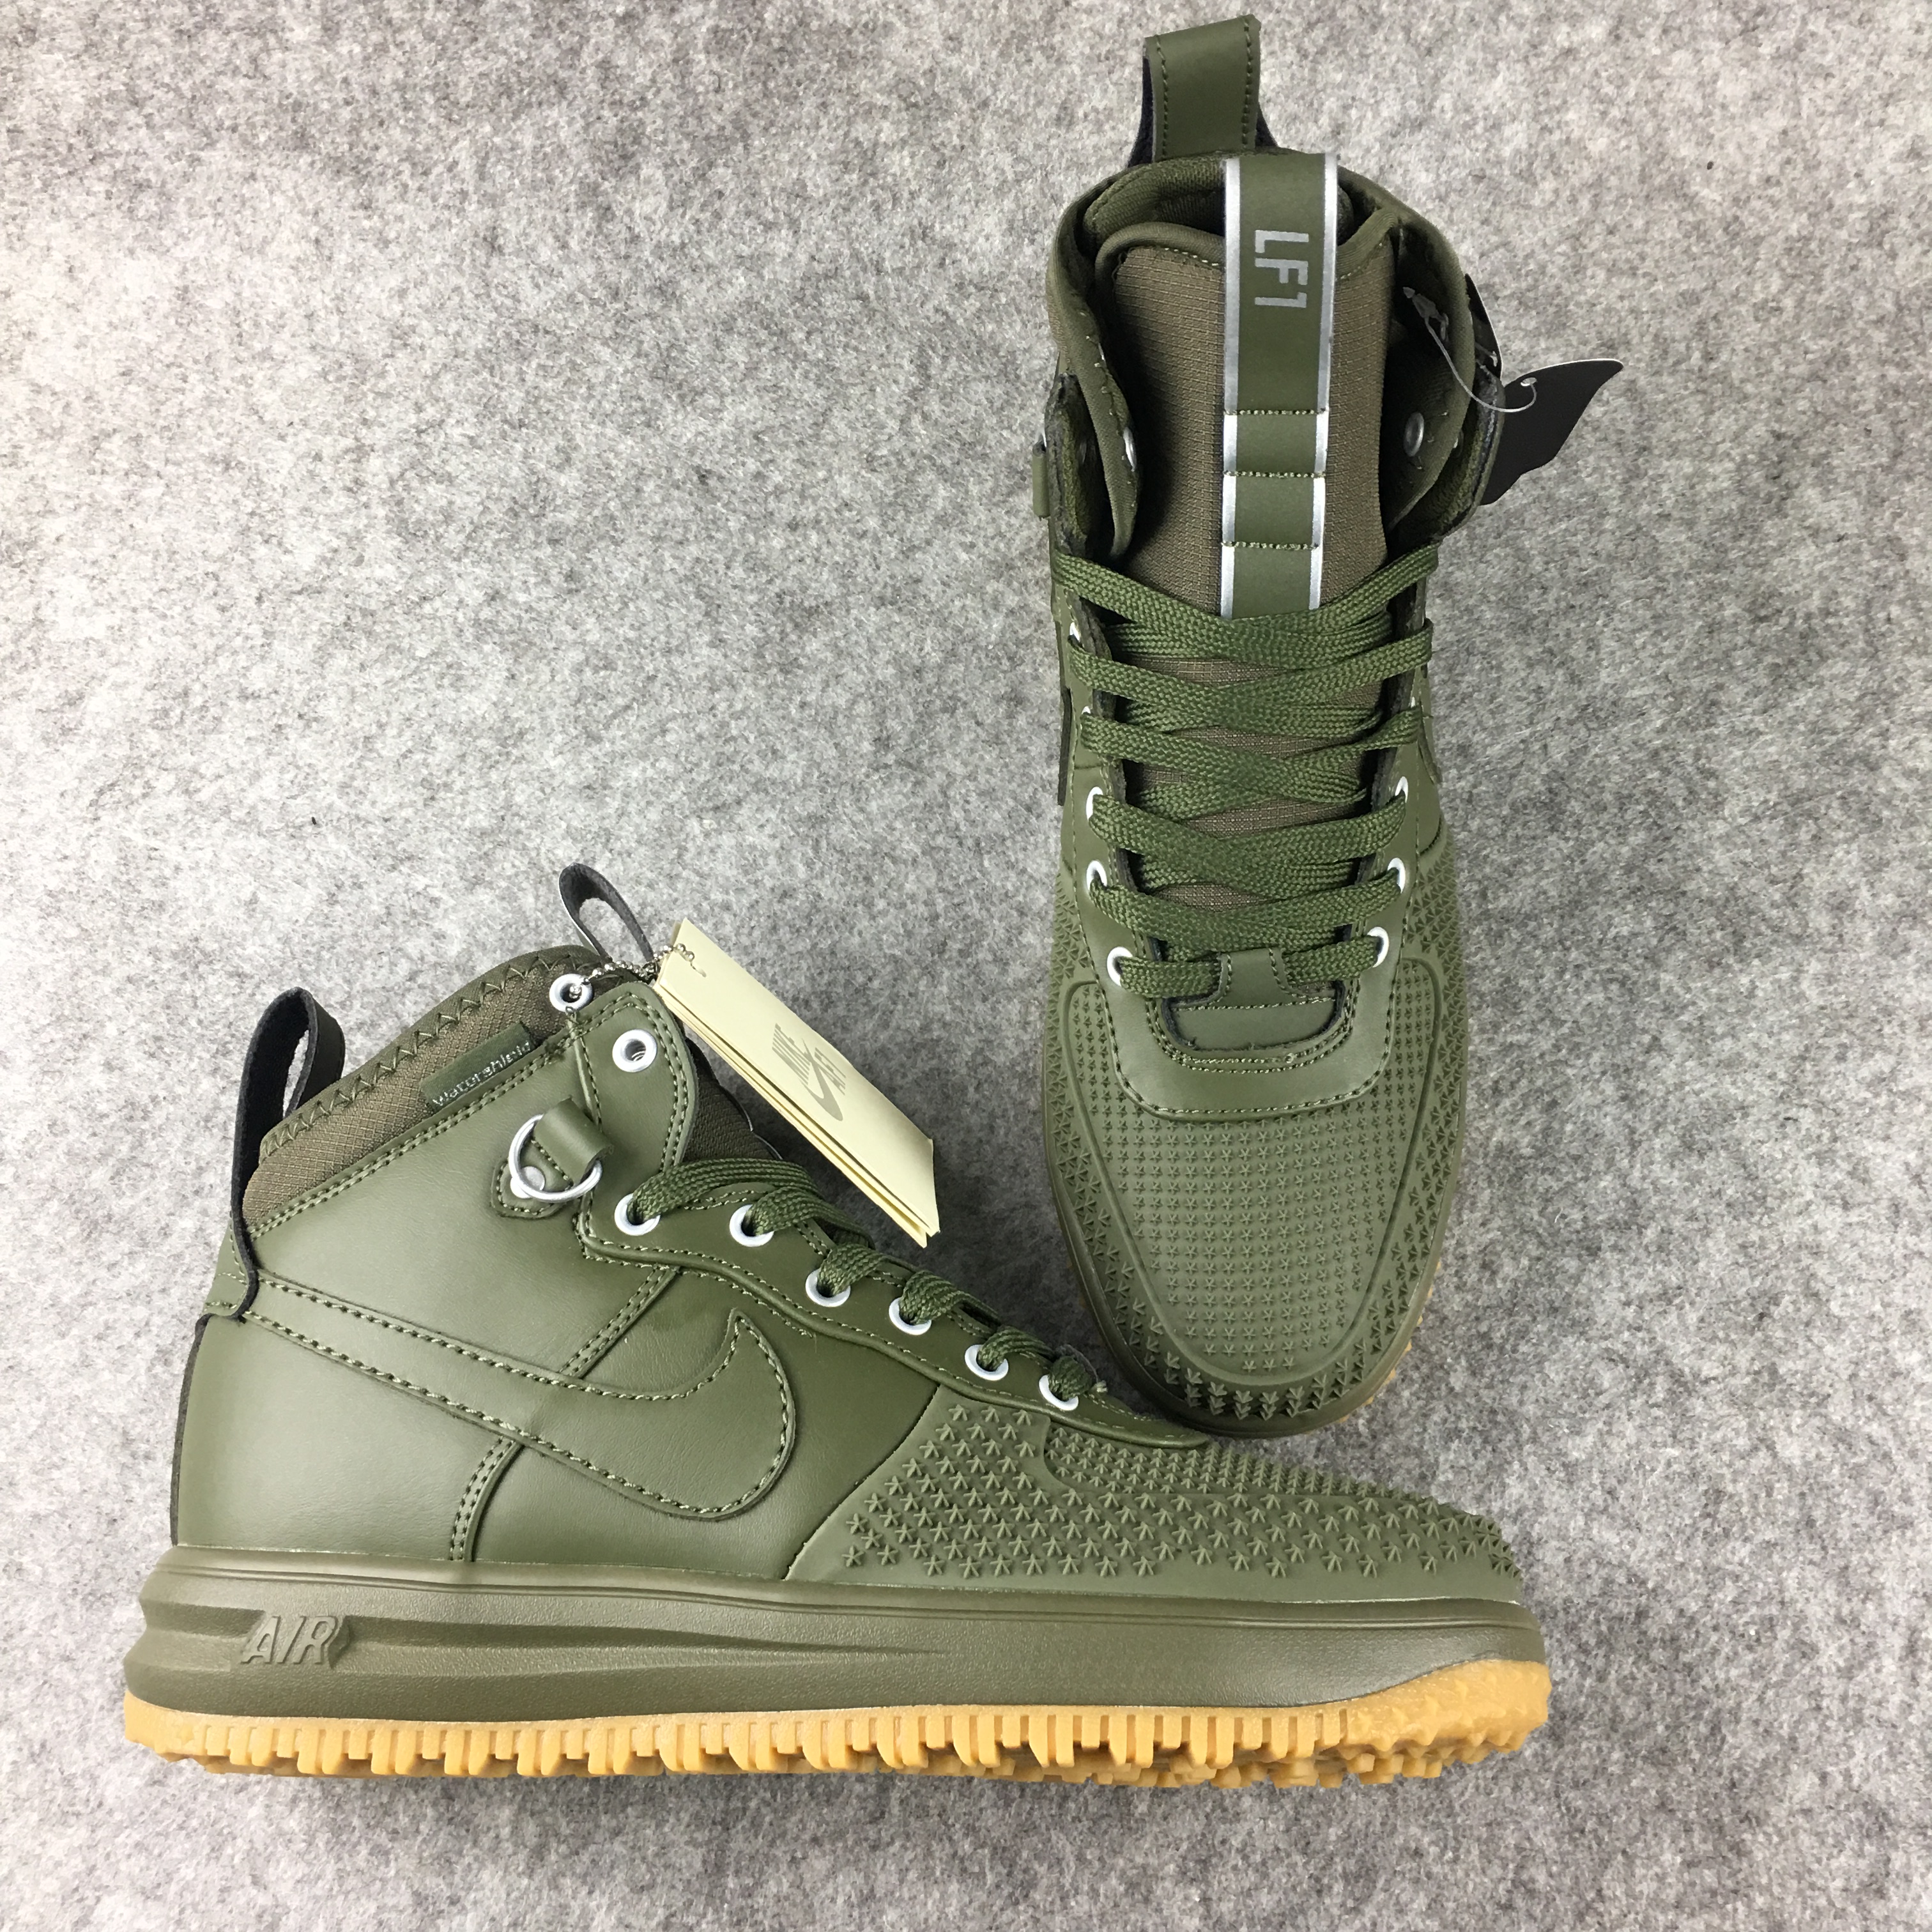 New Nike Lunar Force 1 High Army Green Shoes